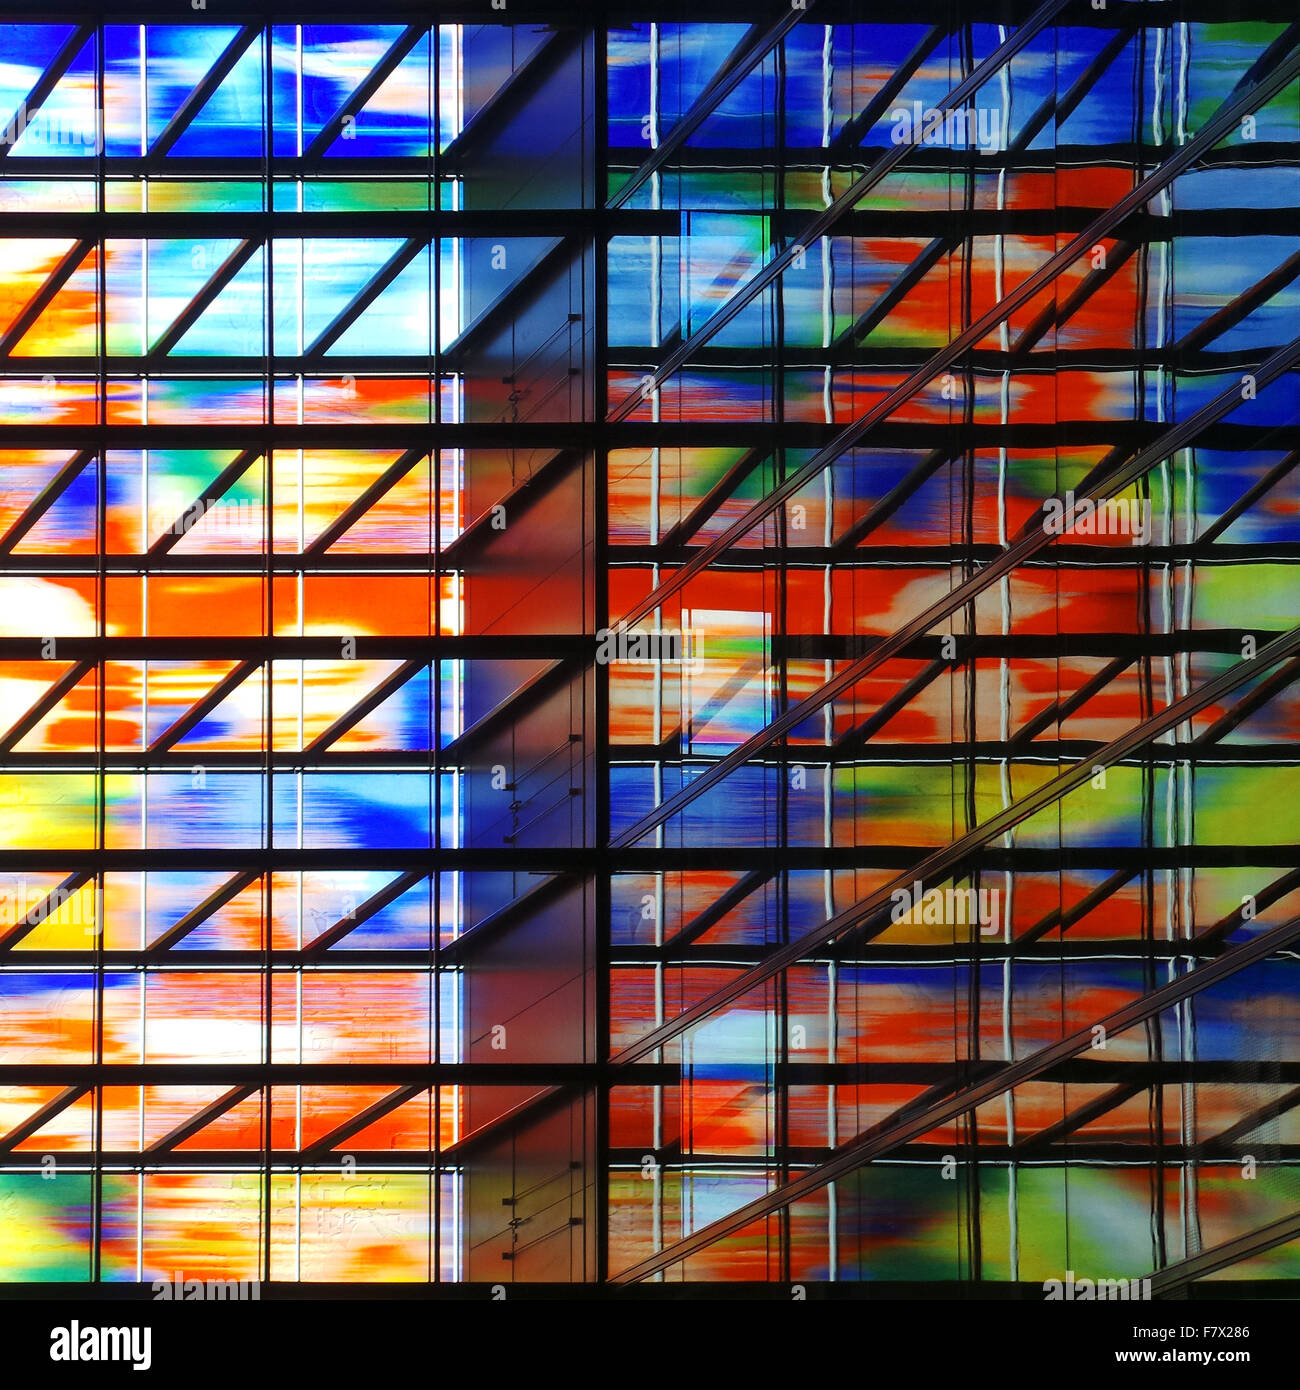 Colorful windows of a high rise building Stock Photo